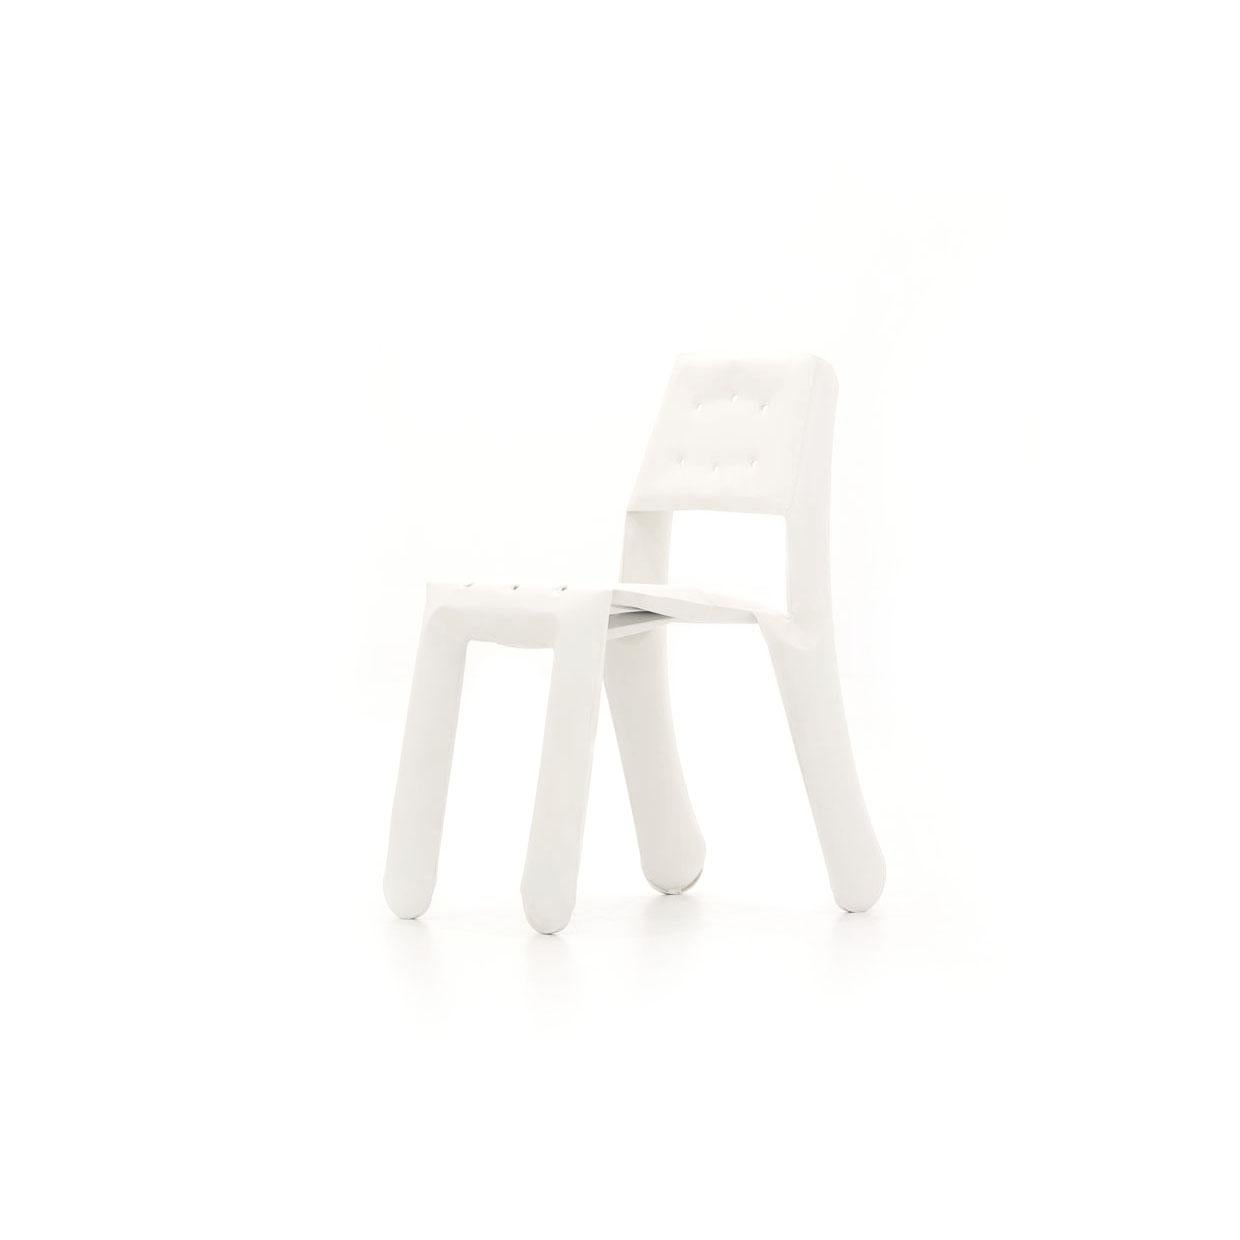 A development of the limited edition Chippensteel 0.5 chair available in new colors. It still offers a unique material experience but the shape of the chair has been slightly redesigned to allow a mass-production. The chair has been uniquely